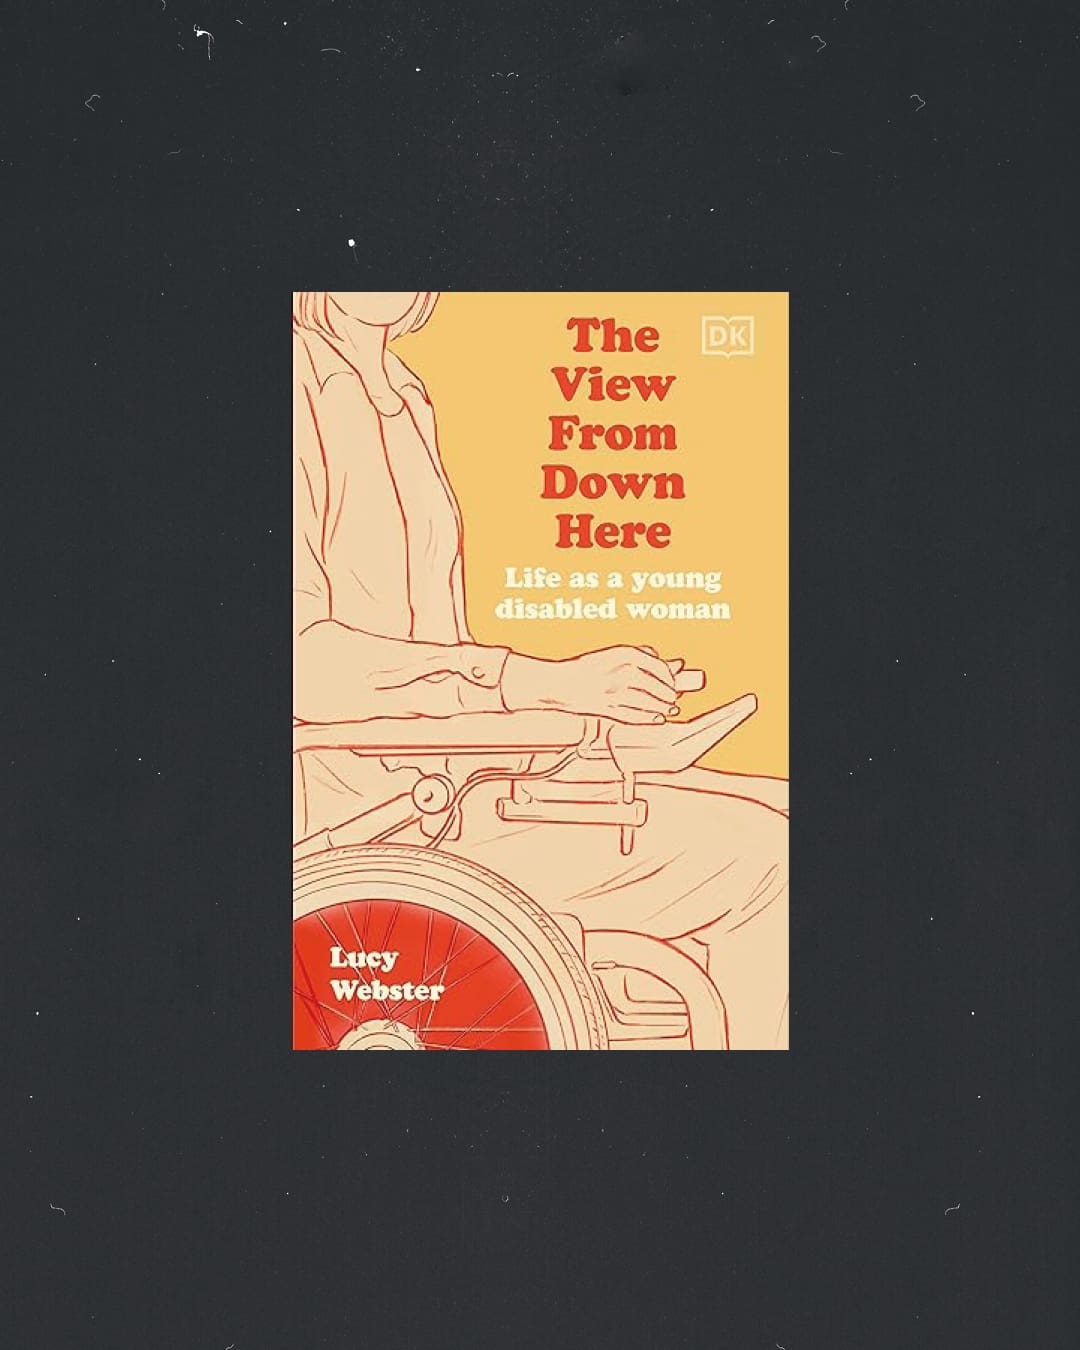 The View From Down Here: Life as a Young Disabled Woman by Lucy Webster book cover